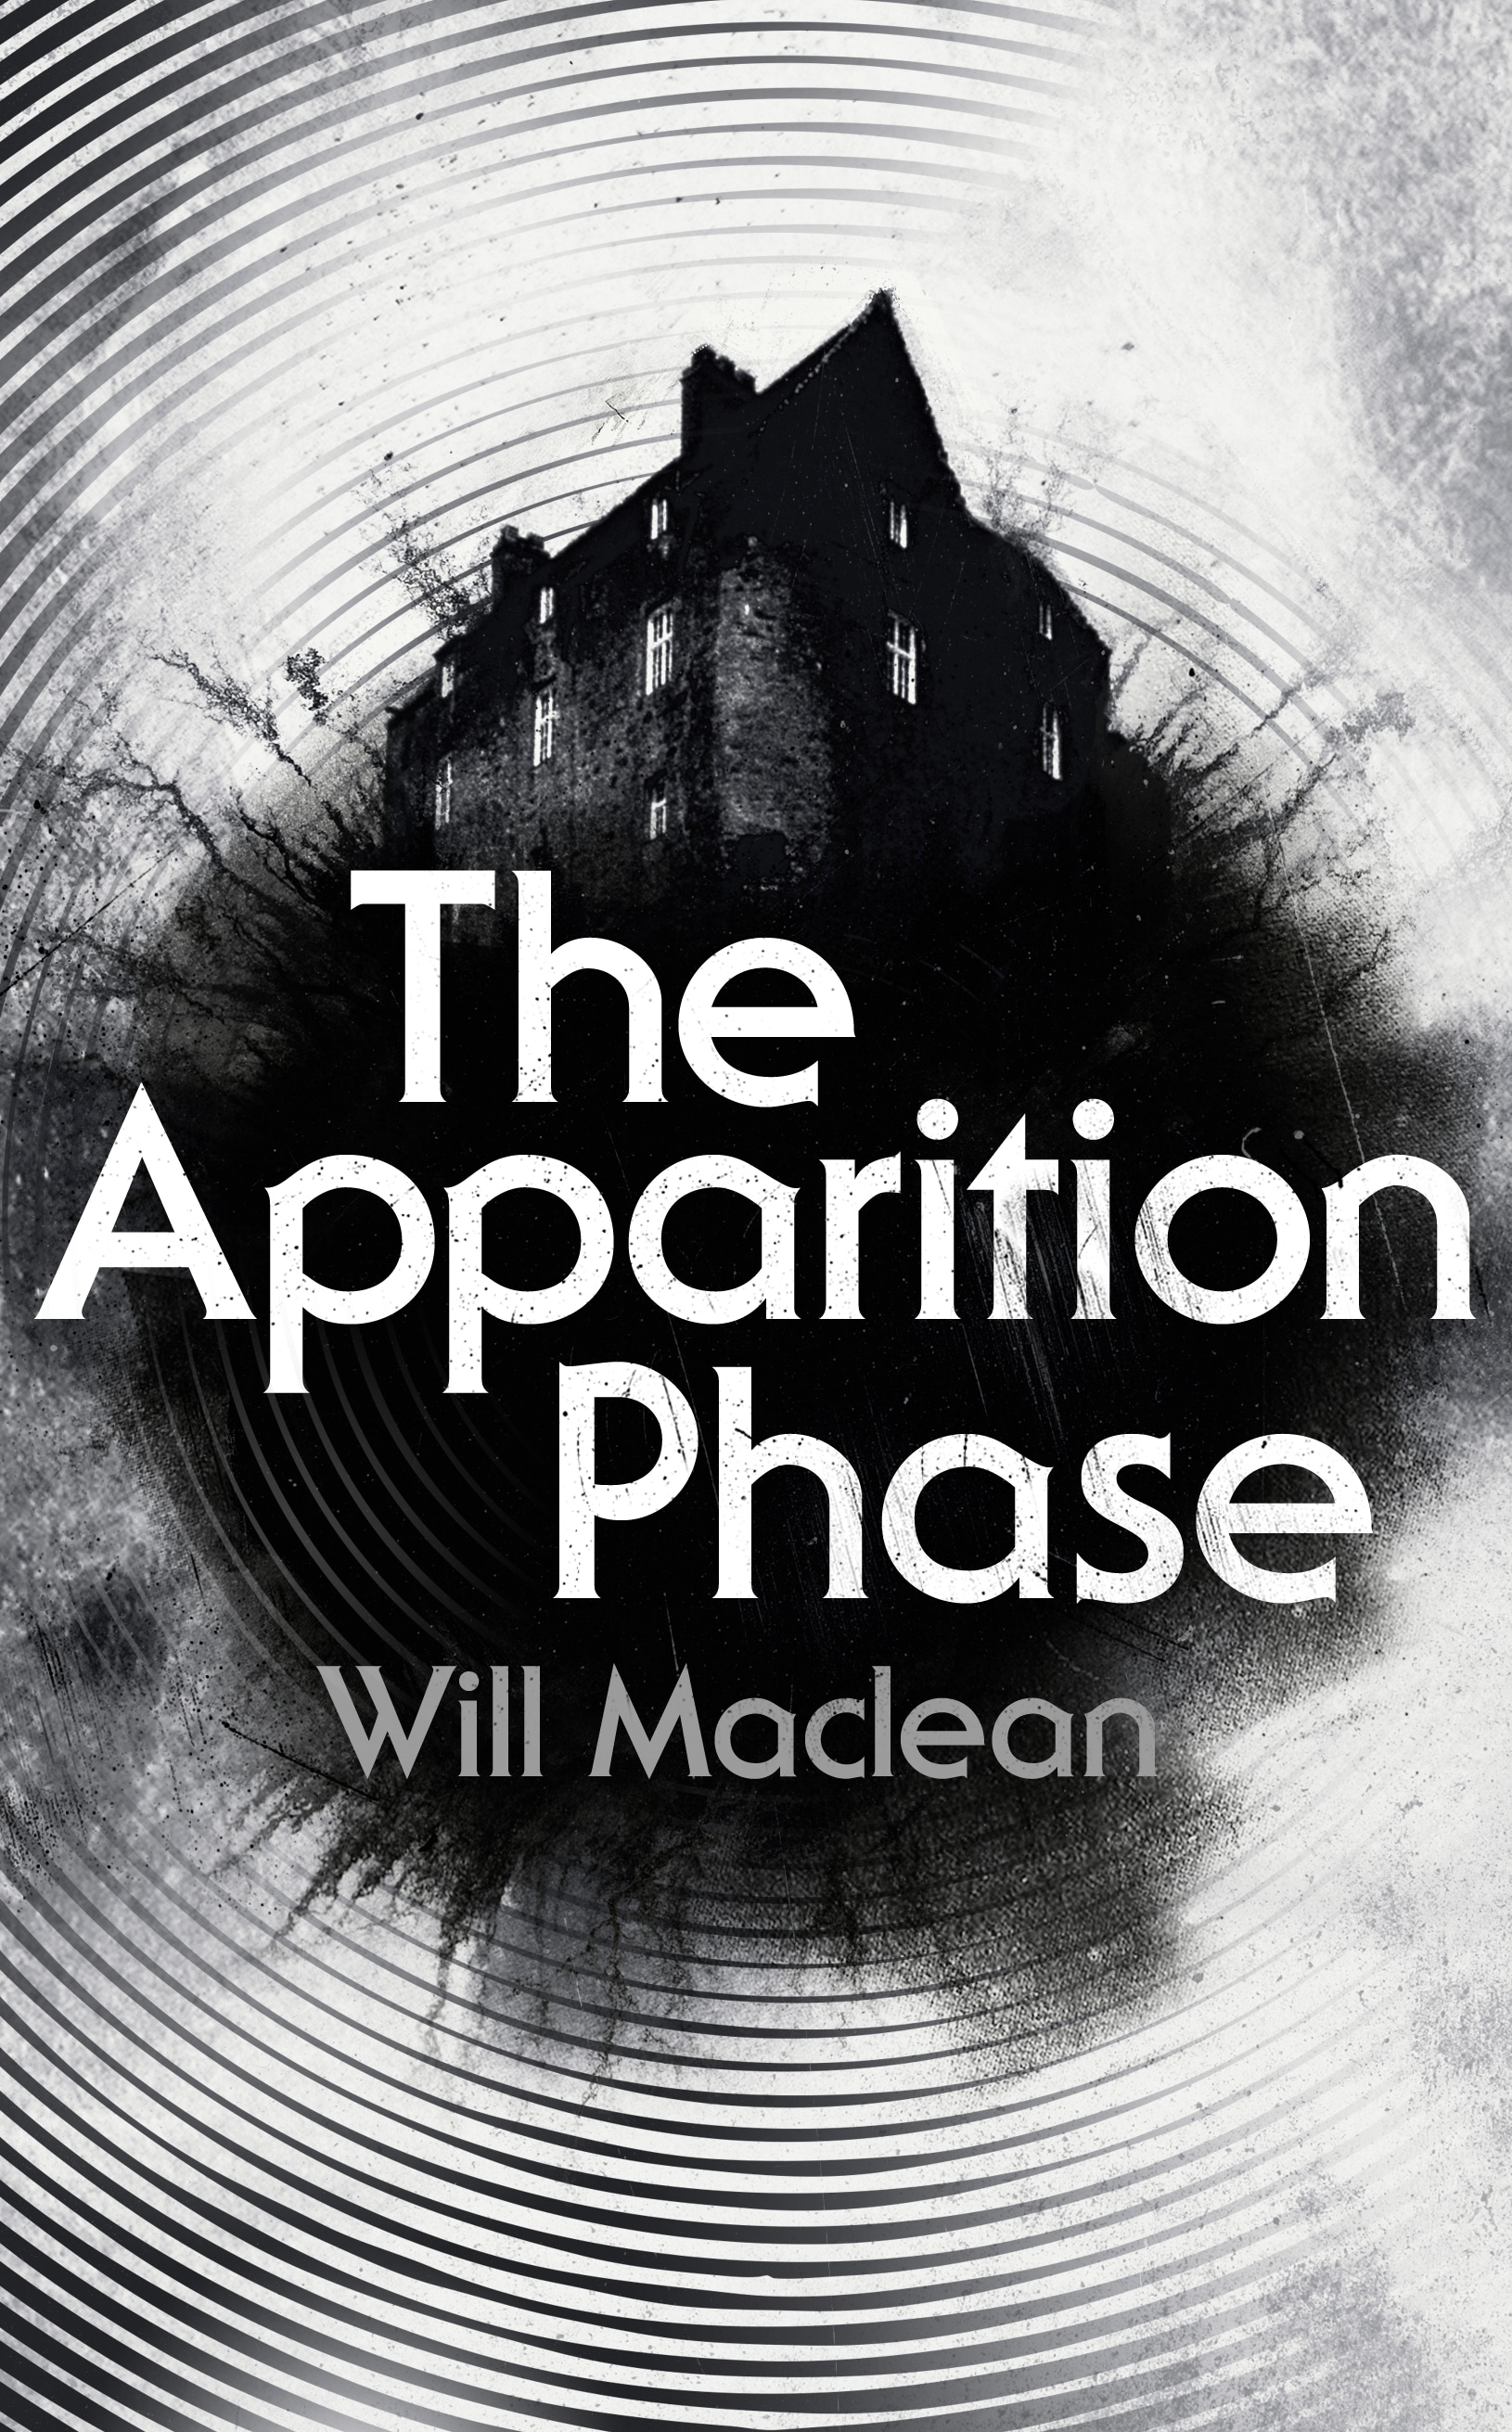 Book “The Apparition Phase” by Will Maclean — October 29, 2020